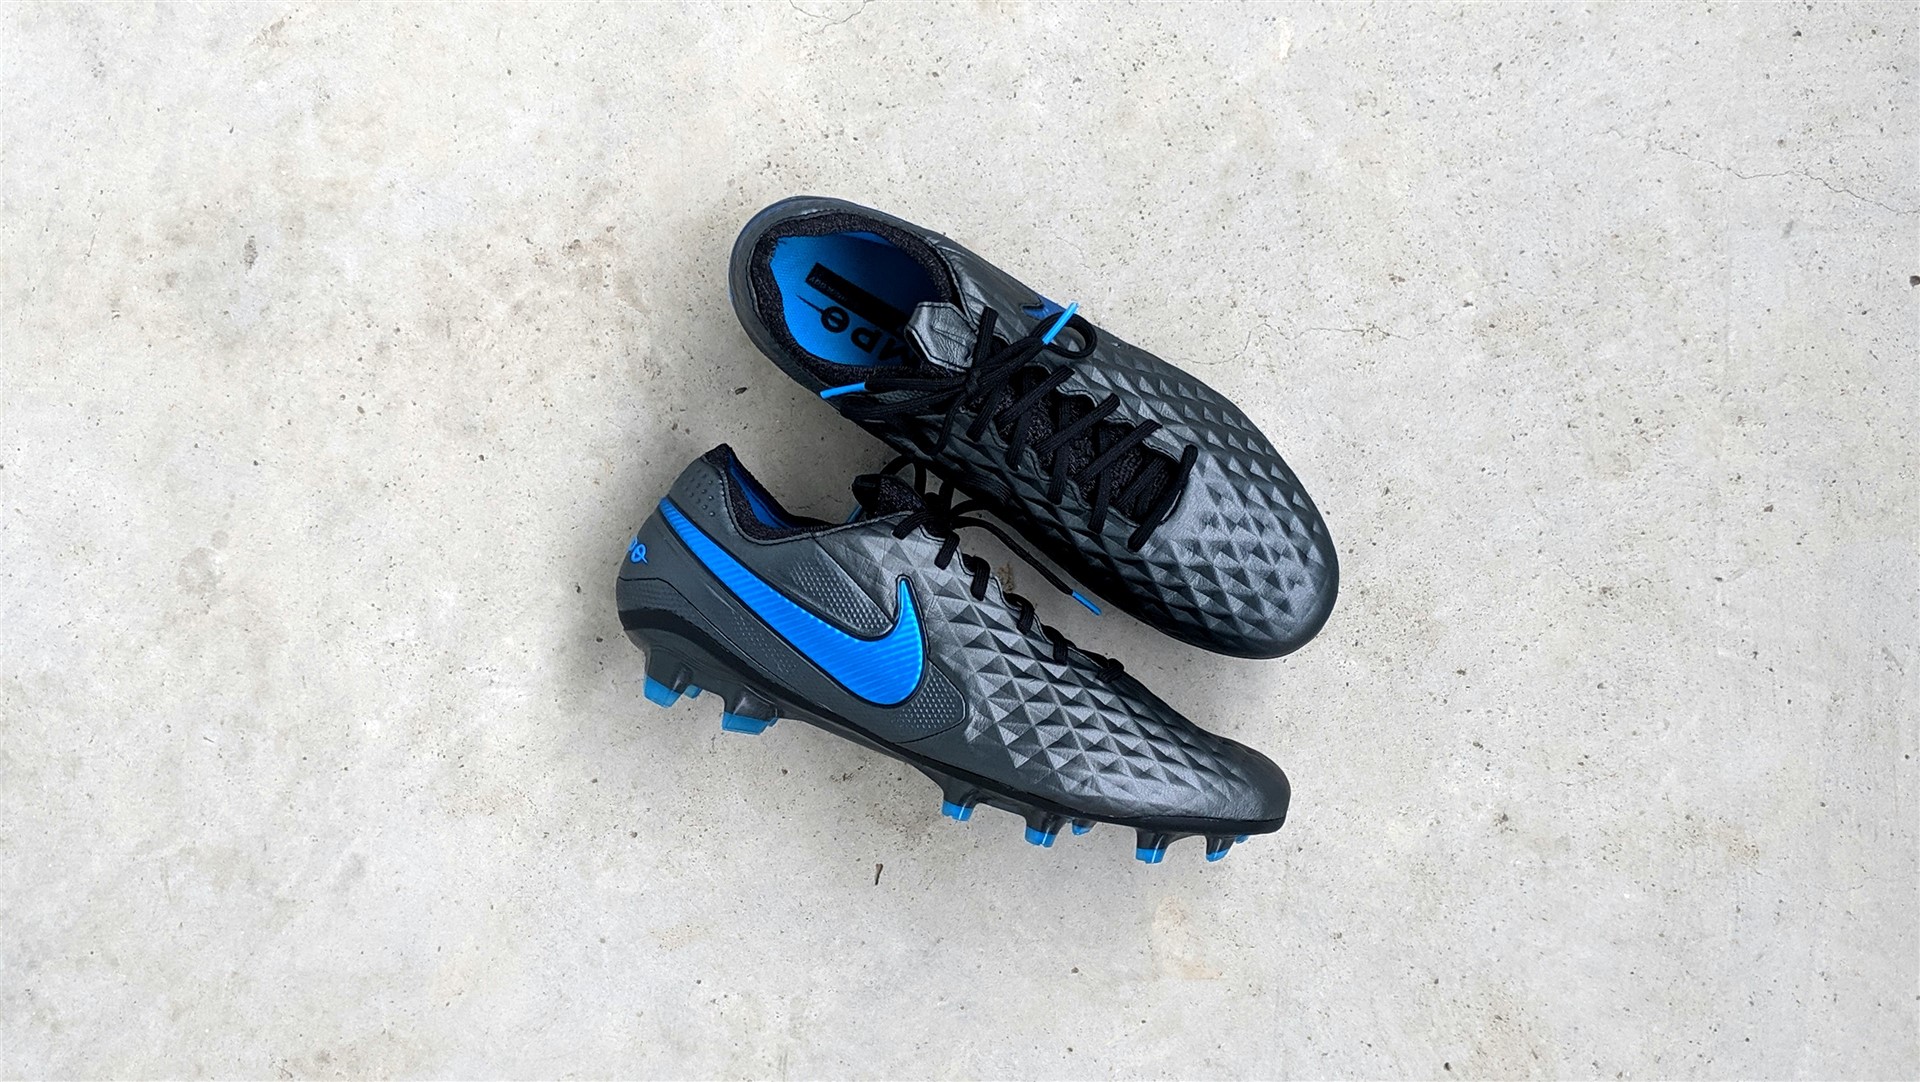 Nike Tiempo Legend 8 Review: A leather 